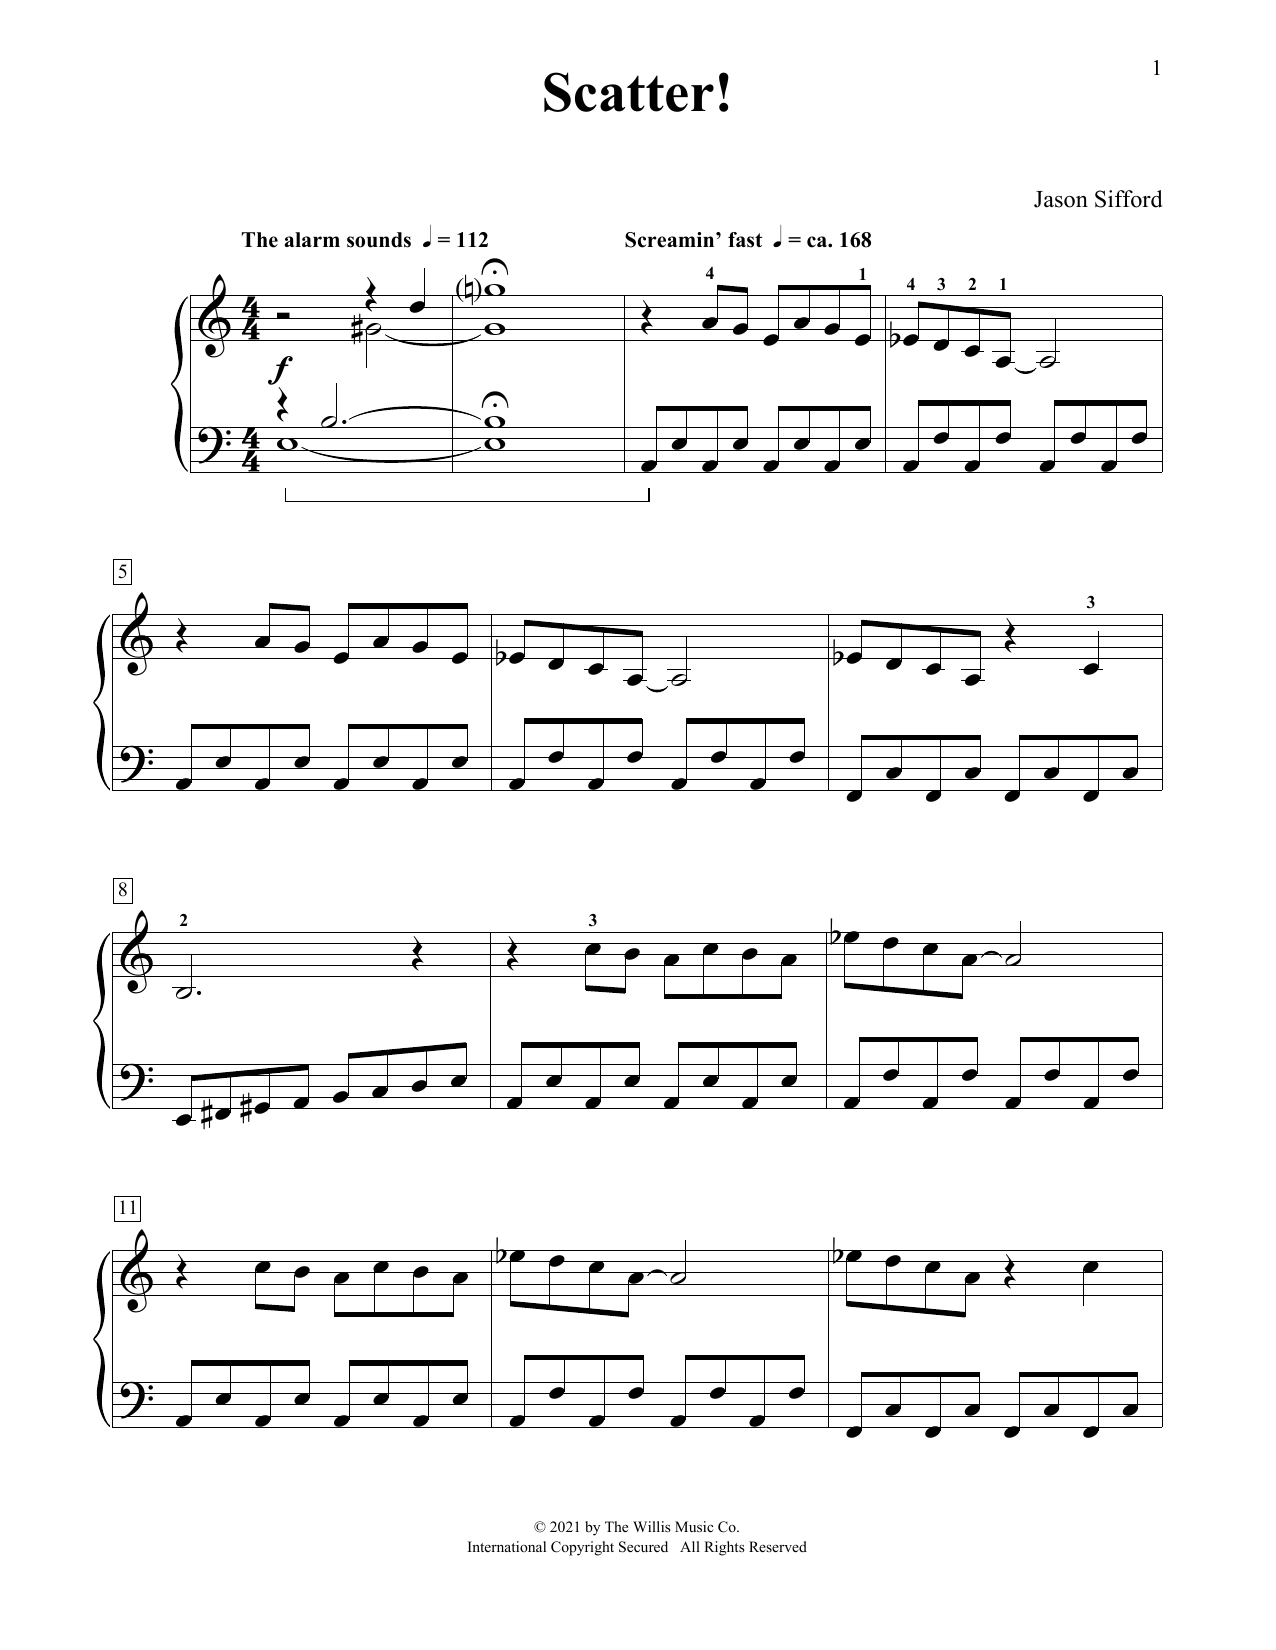 Download Jason Sifford Scatter! Sheet Music